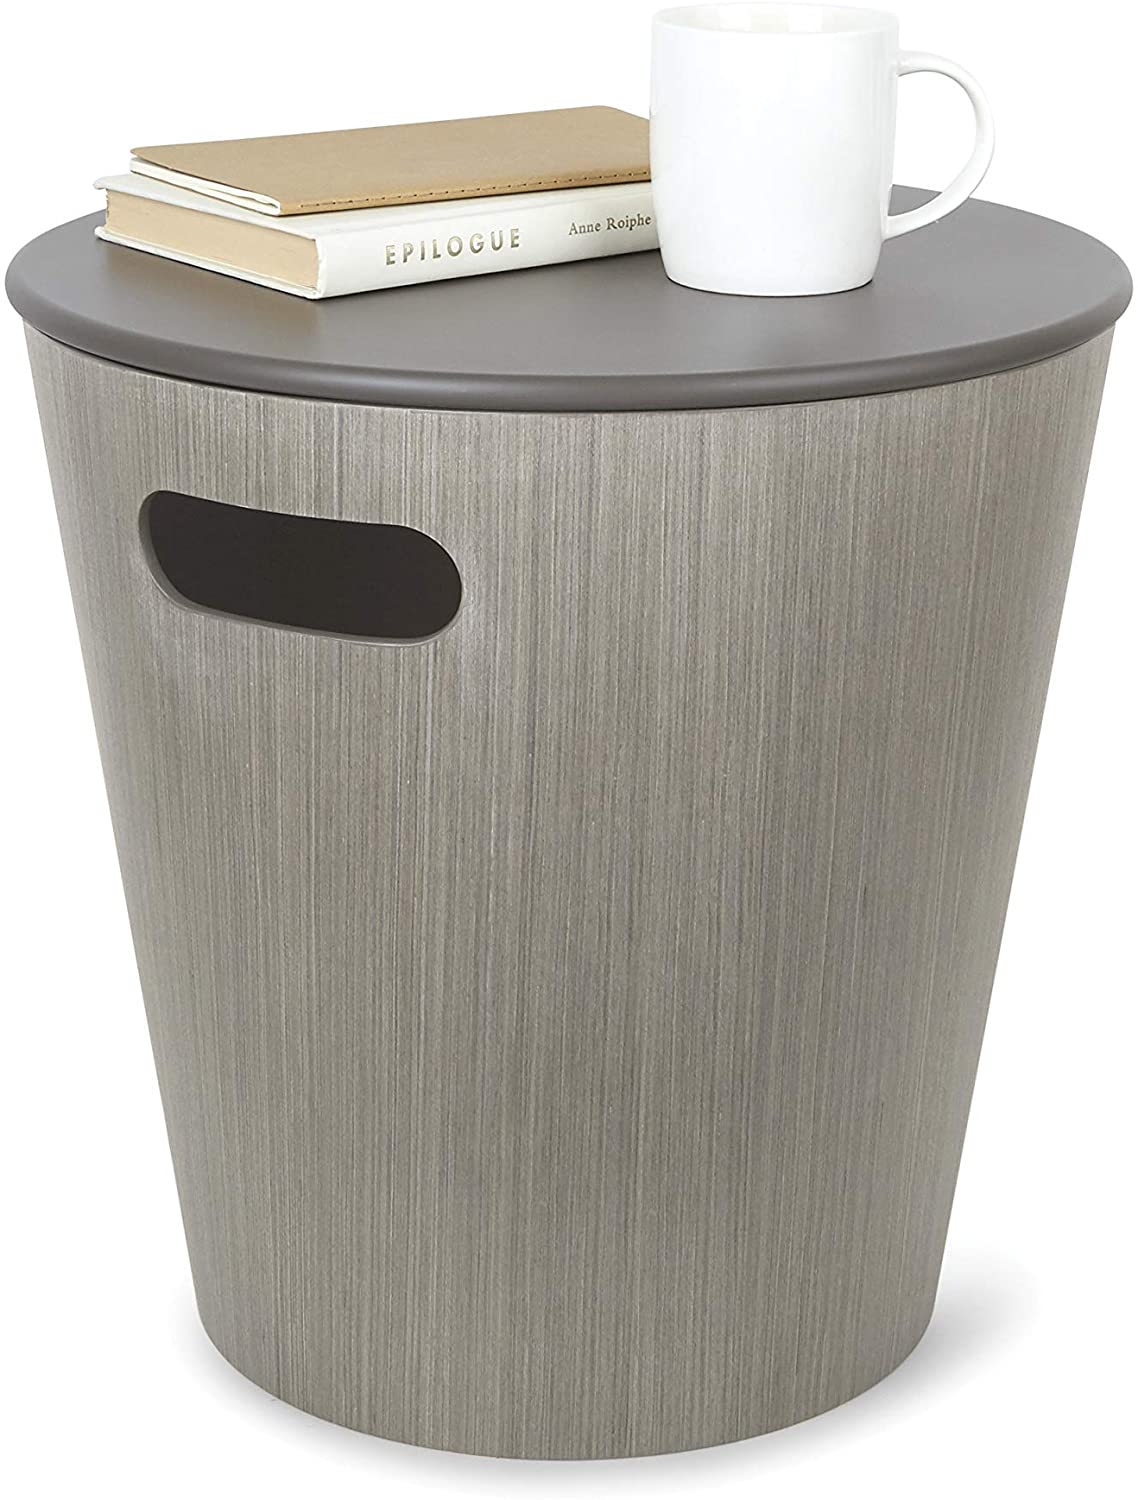 Umbra Woodrow Wastepaper Bin For The Office, Bathroom, Living Room And More